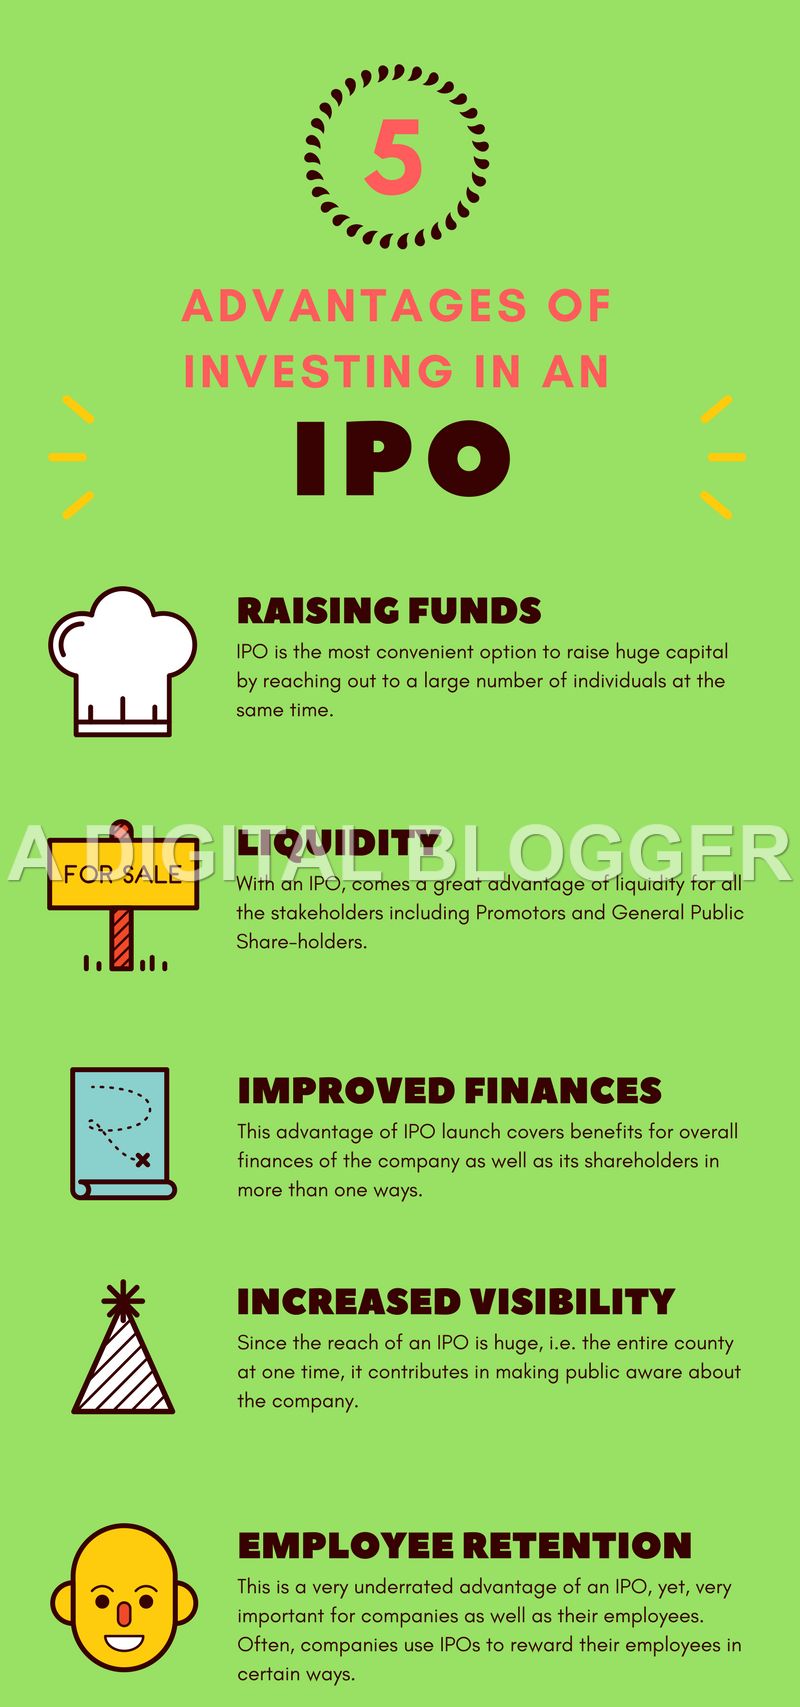 Advantages of IPO